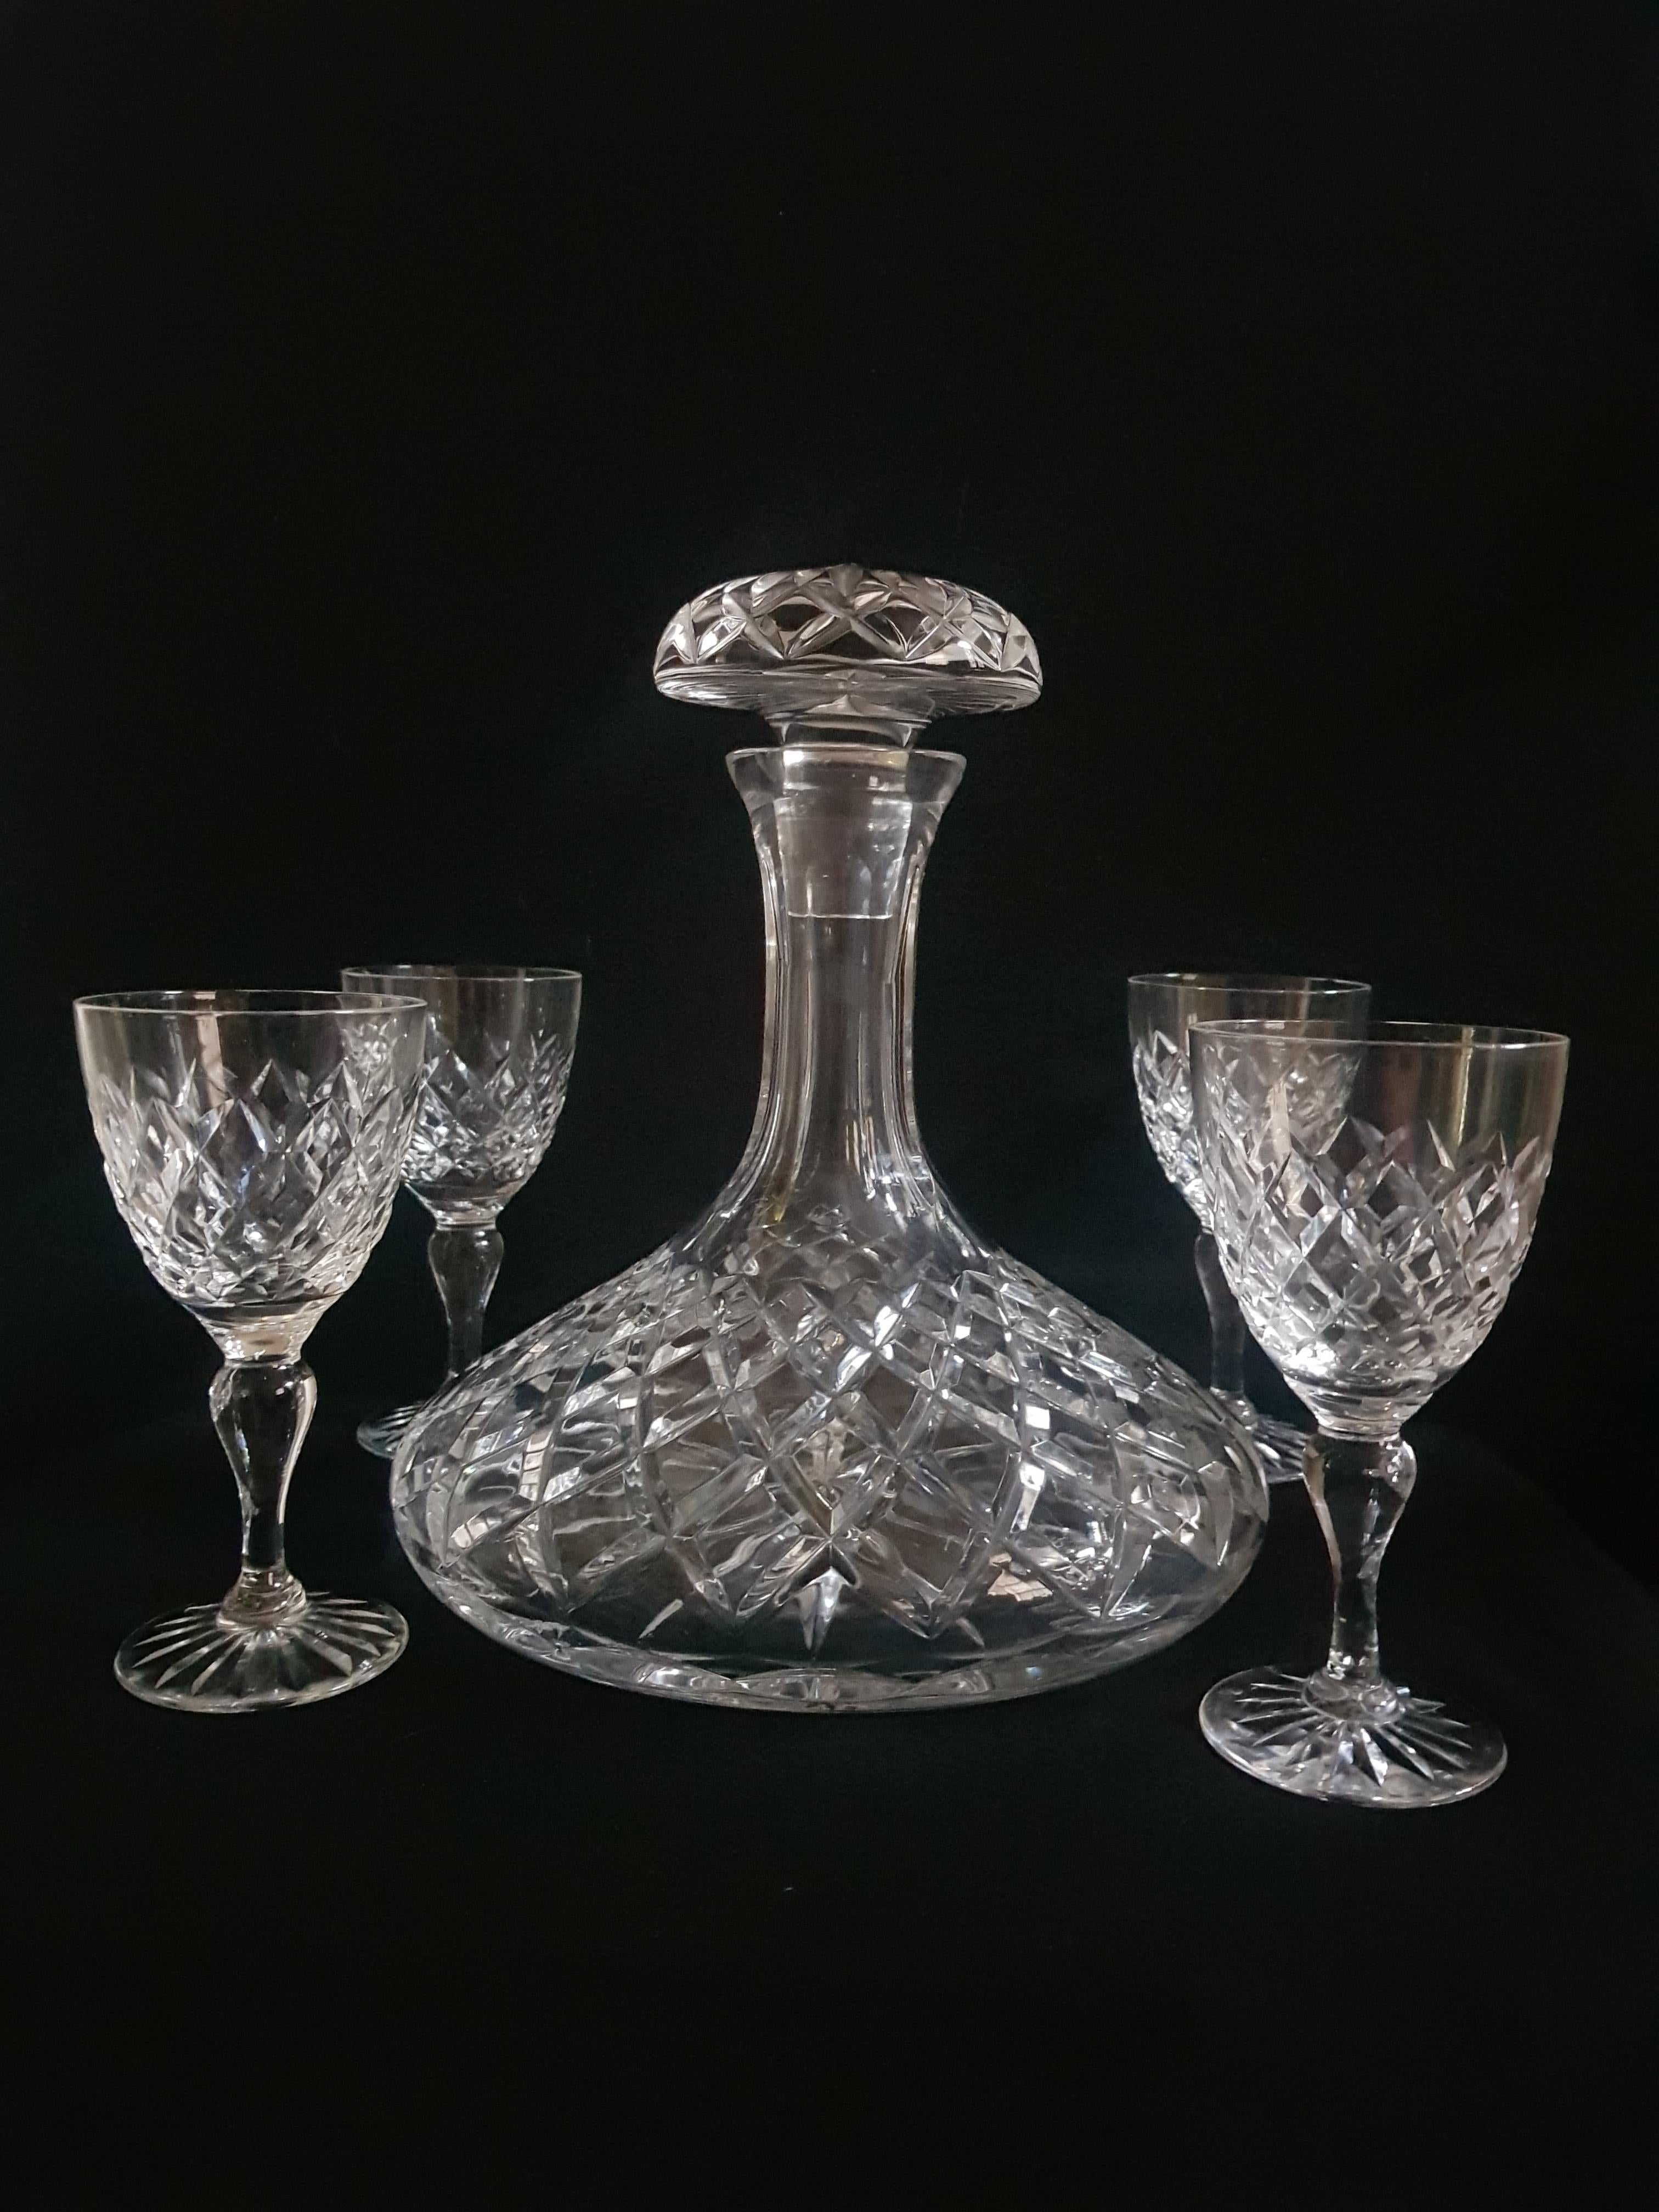 Beautiful vitange Webb hand cut crystal drinking set made in England decanter with stopper and 4 glasses acid stamped, decanter have 25 cm tall and 22 cm width and glasses have 13.5 cm tall and 6.5 cm width brilliant condition.